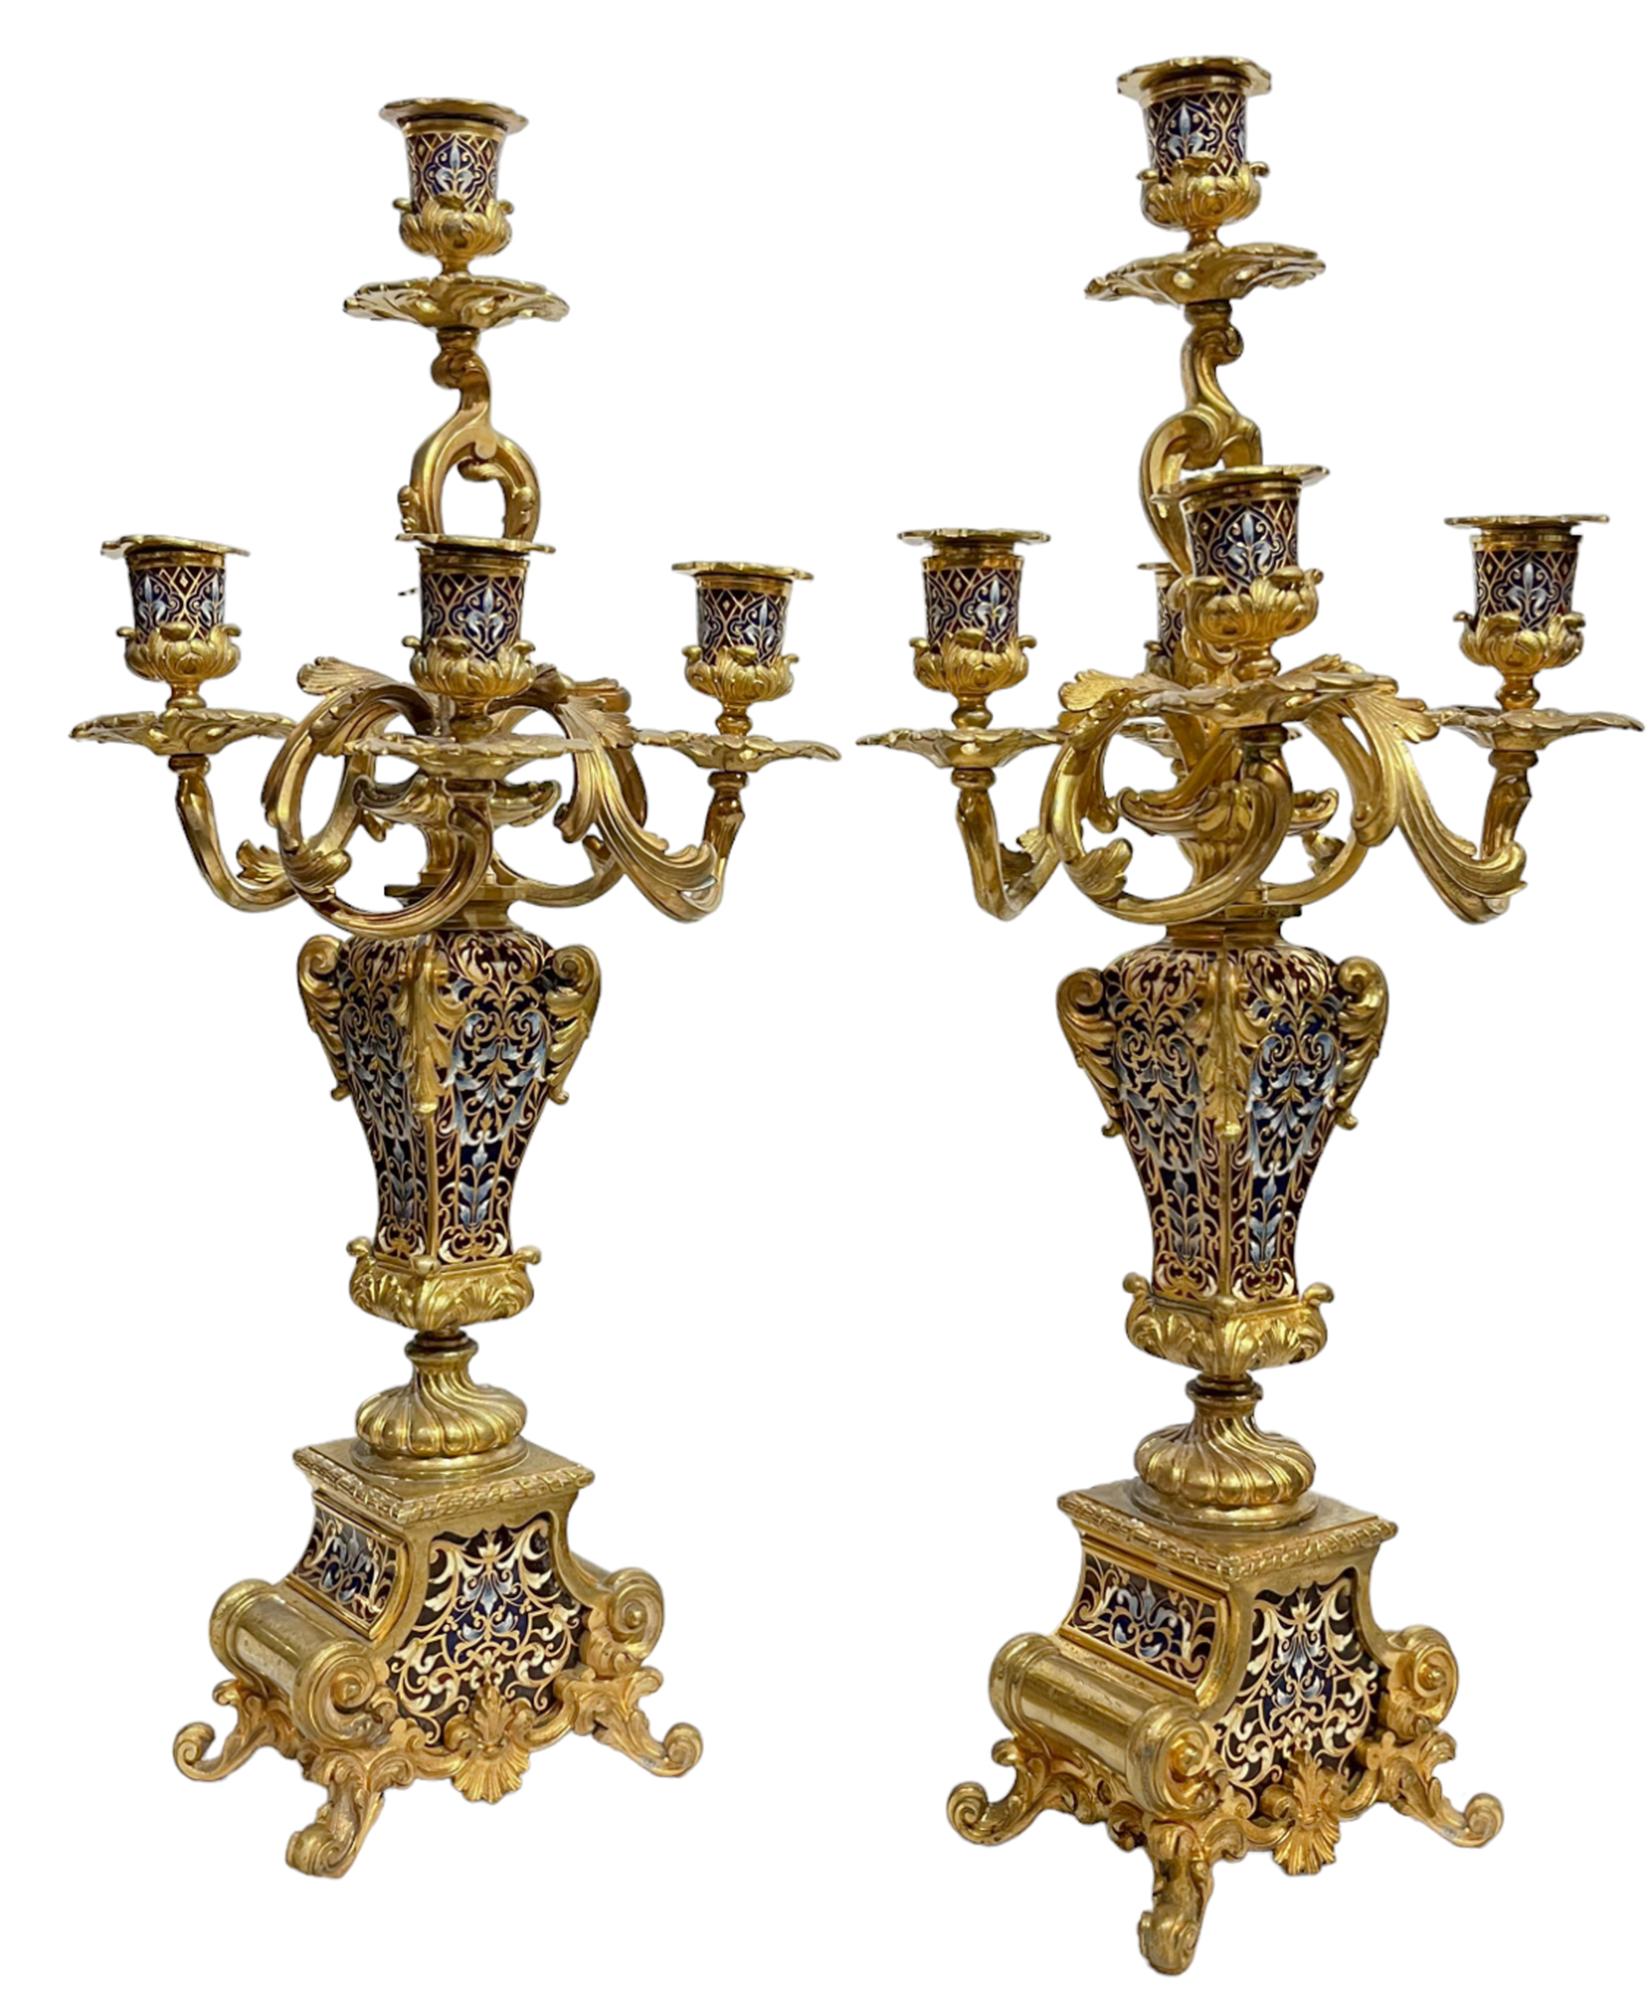 Pair of Champlevé and Gilt-bronze Five-light Candelabras

polychrome enameled and with scrolled foliate arms and candle nozzles atop square vasiform supports set on a scrolled base,
